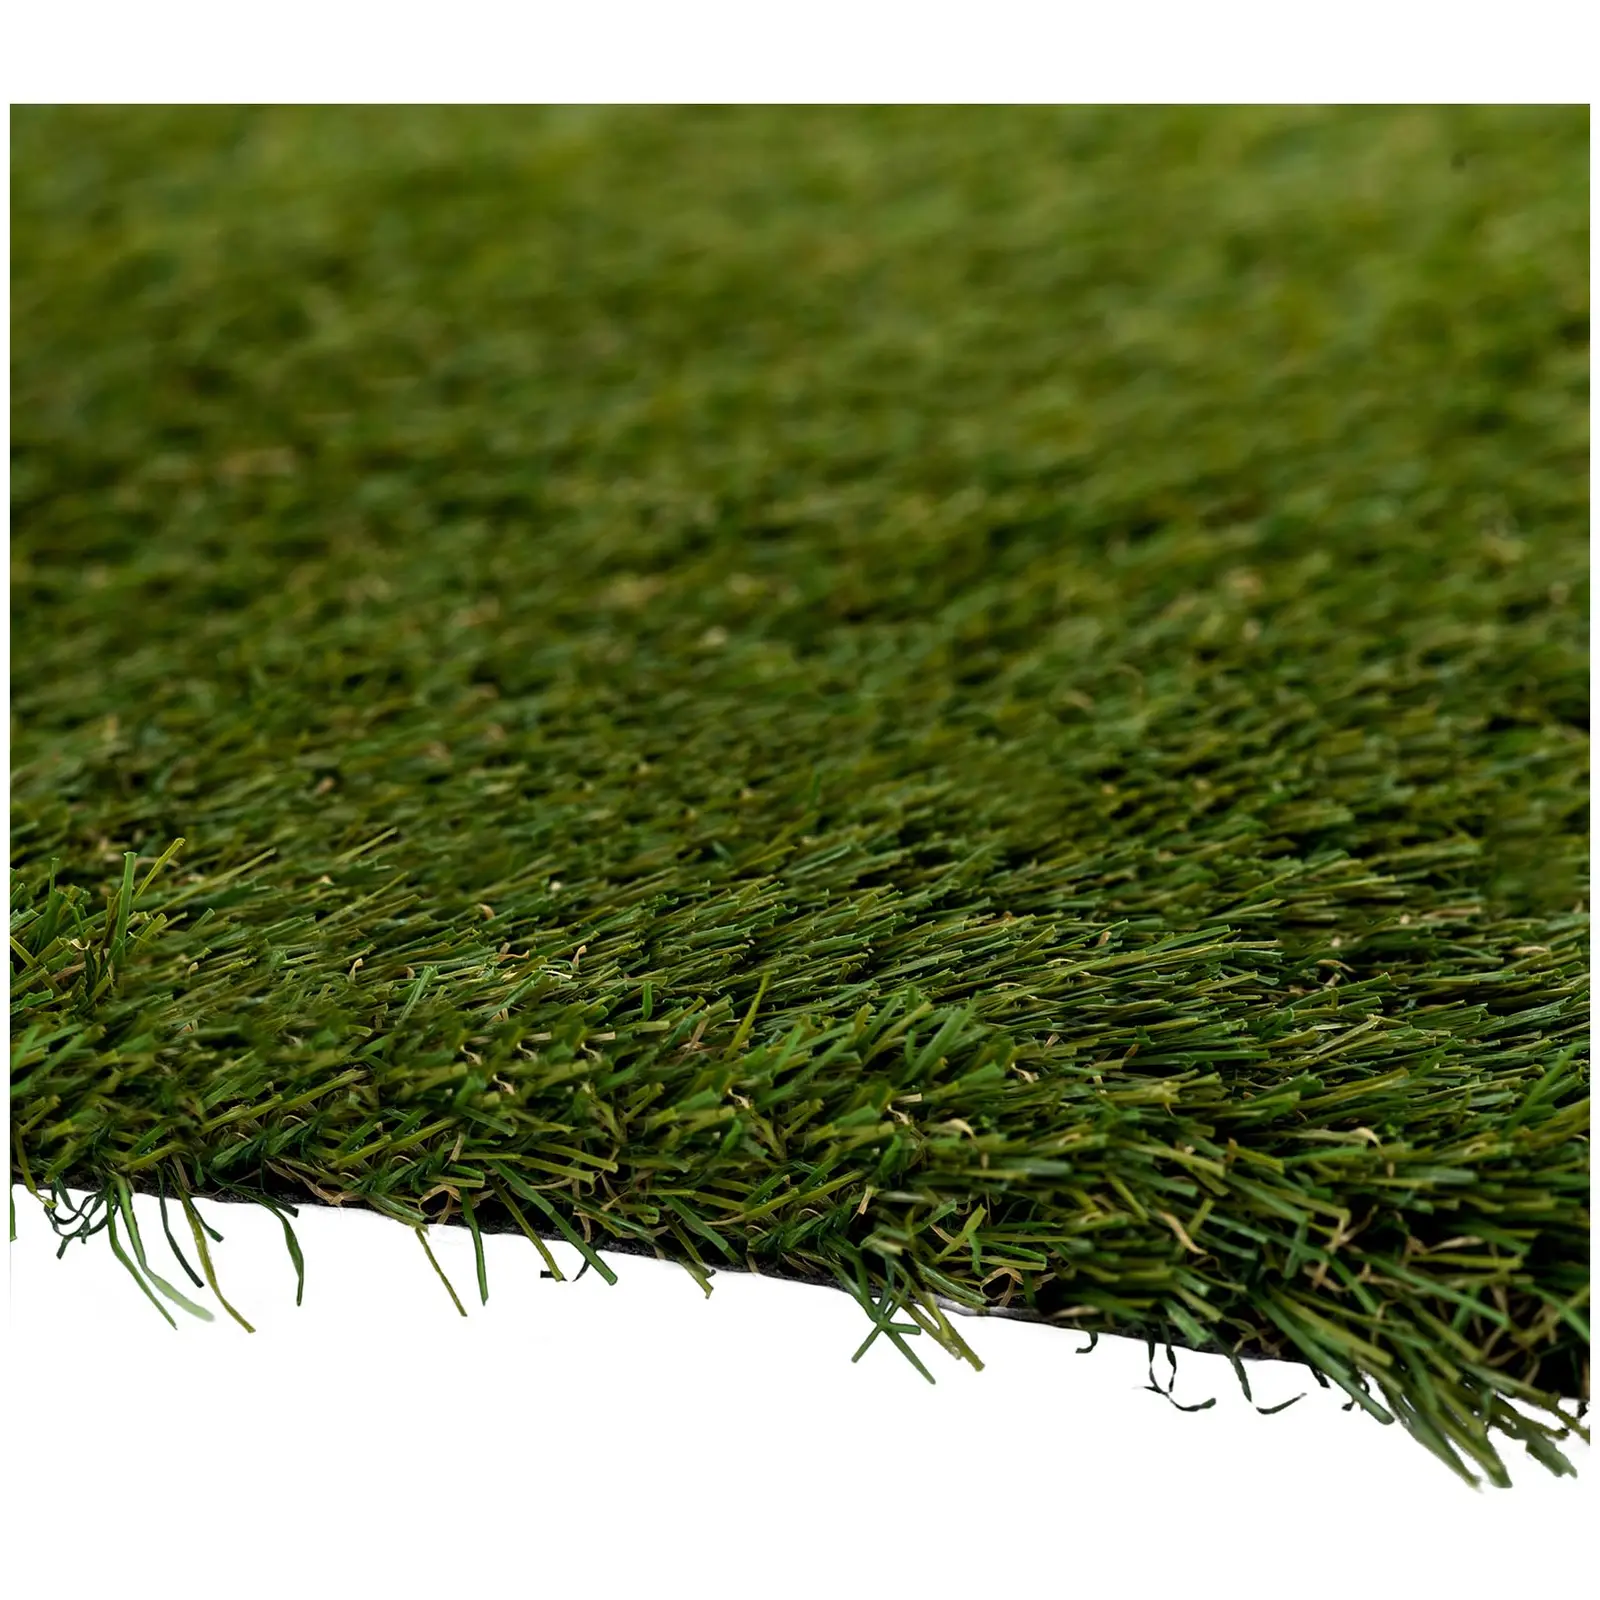 Artificial grass - 200 x 2500 cm - Height: 30 mm - Stitch rate: 20/10 cm - UV-resistant